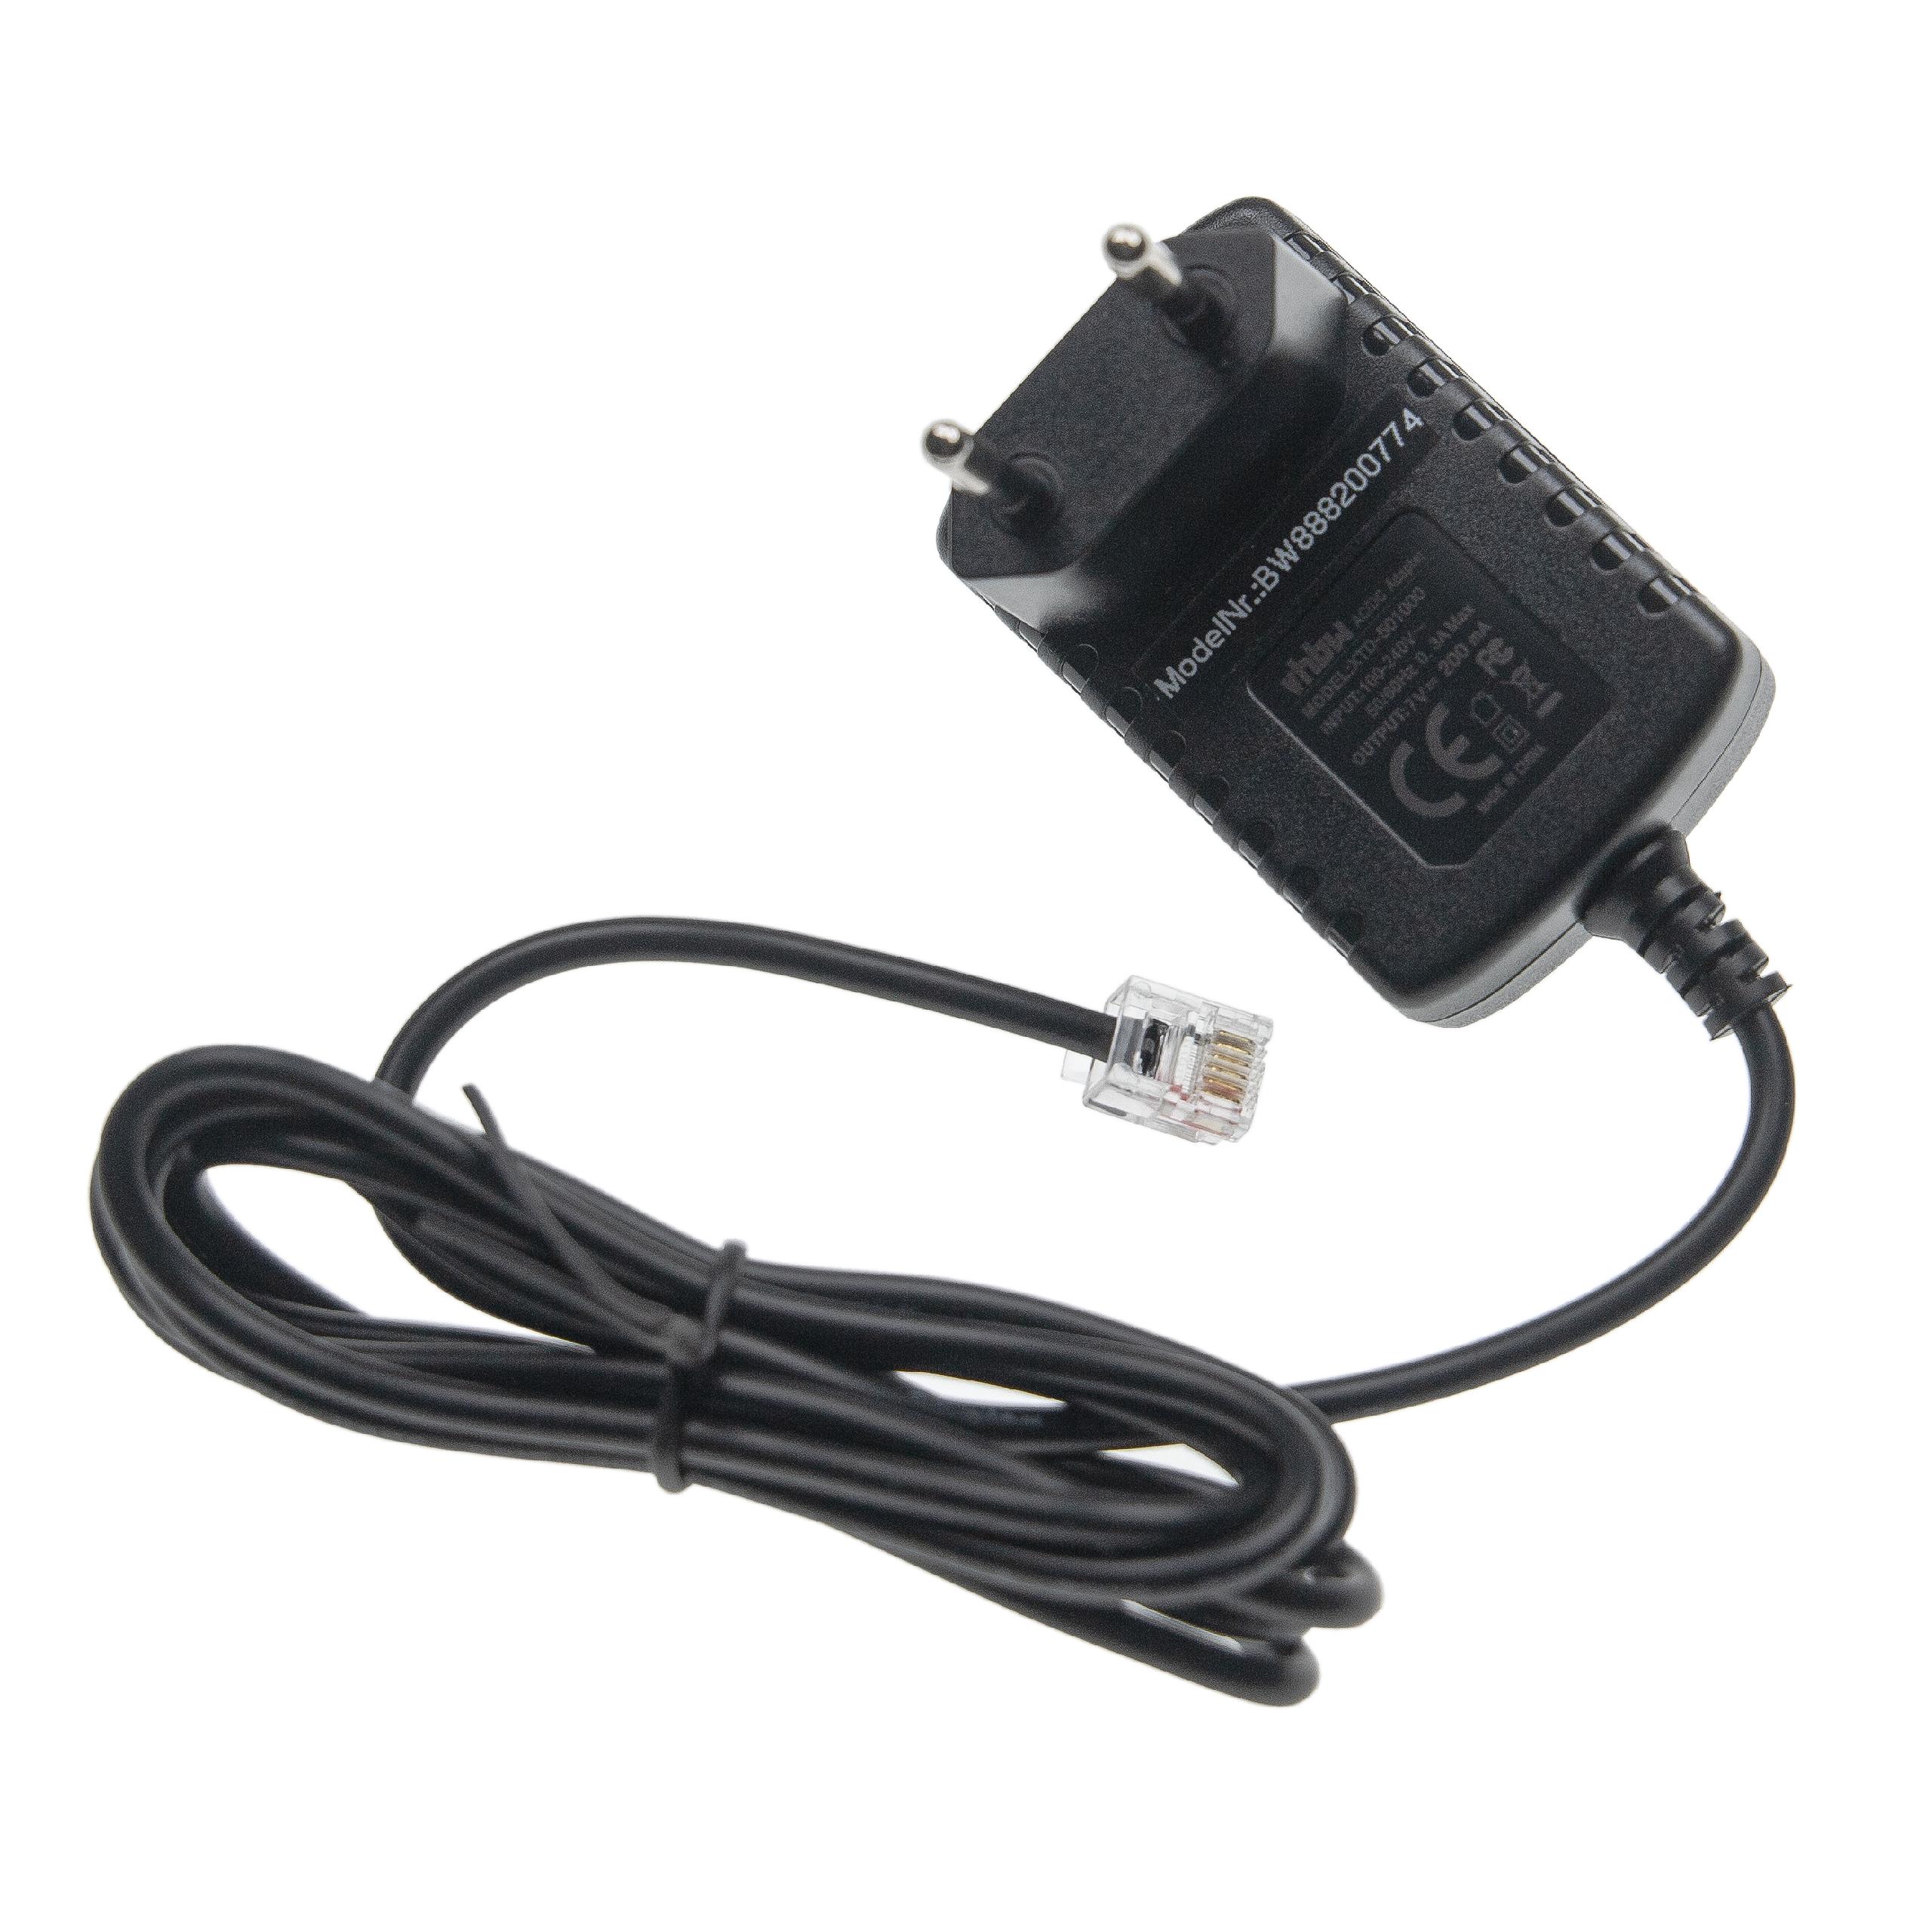 Mains Power Adapter replaces Philips AGC07V200T for Landline Telephone Charging Station